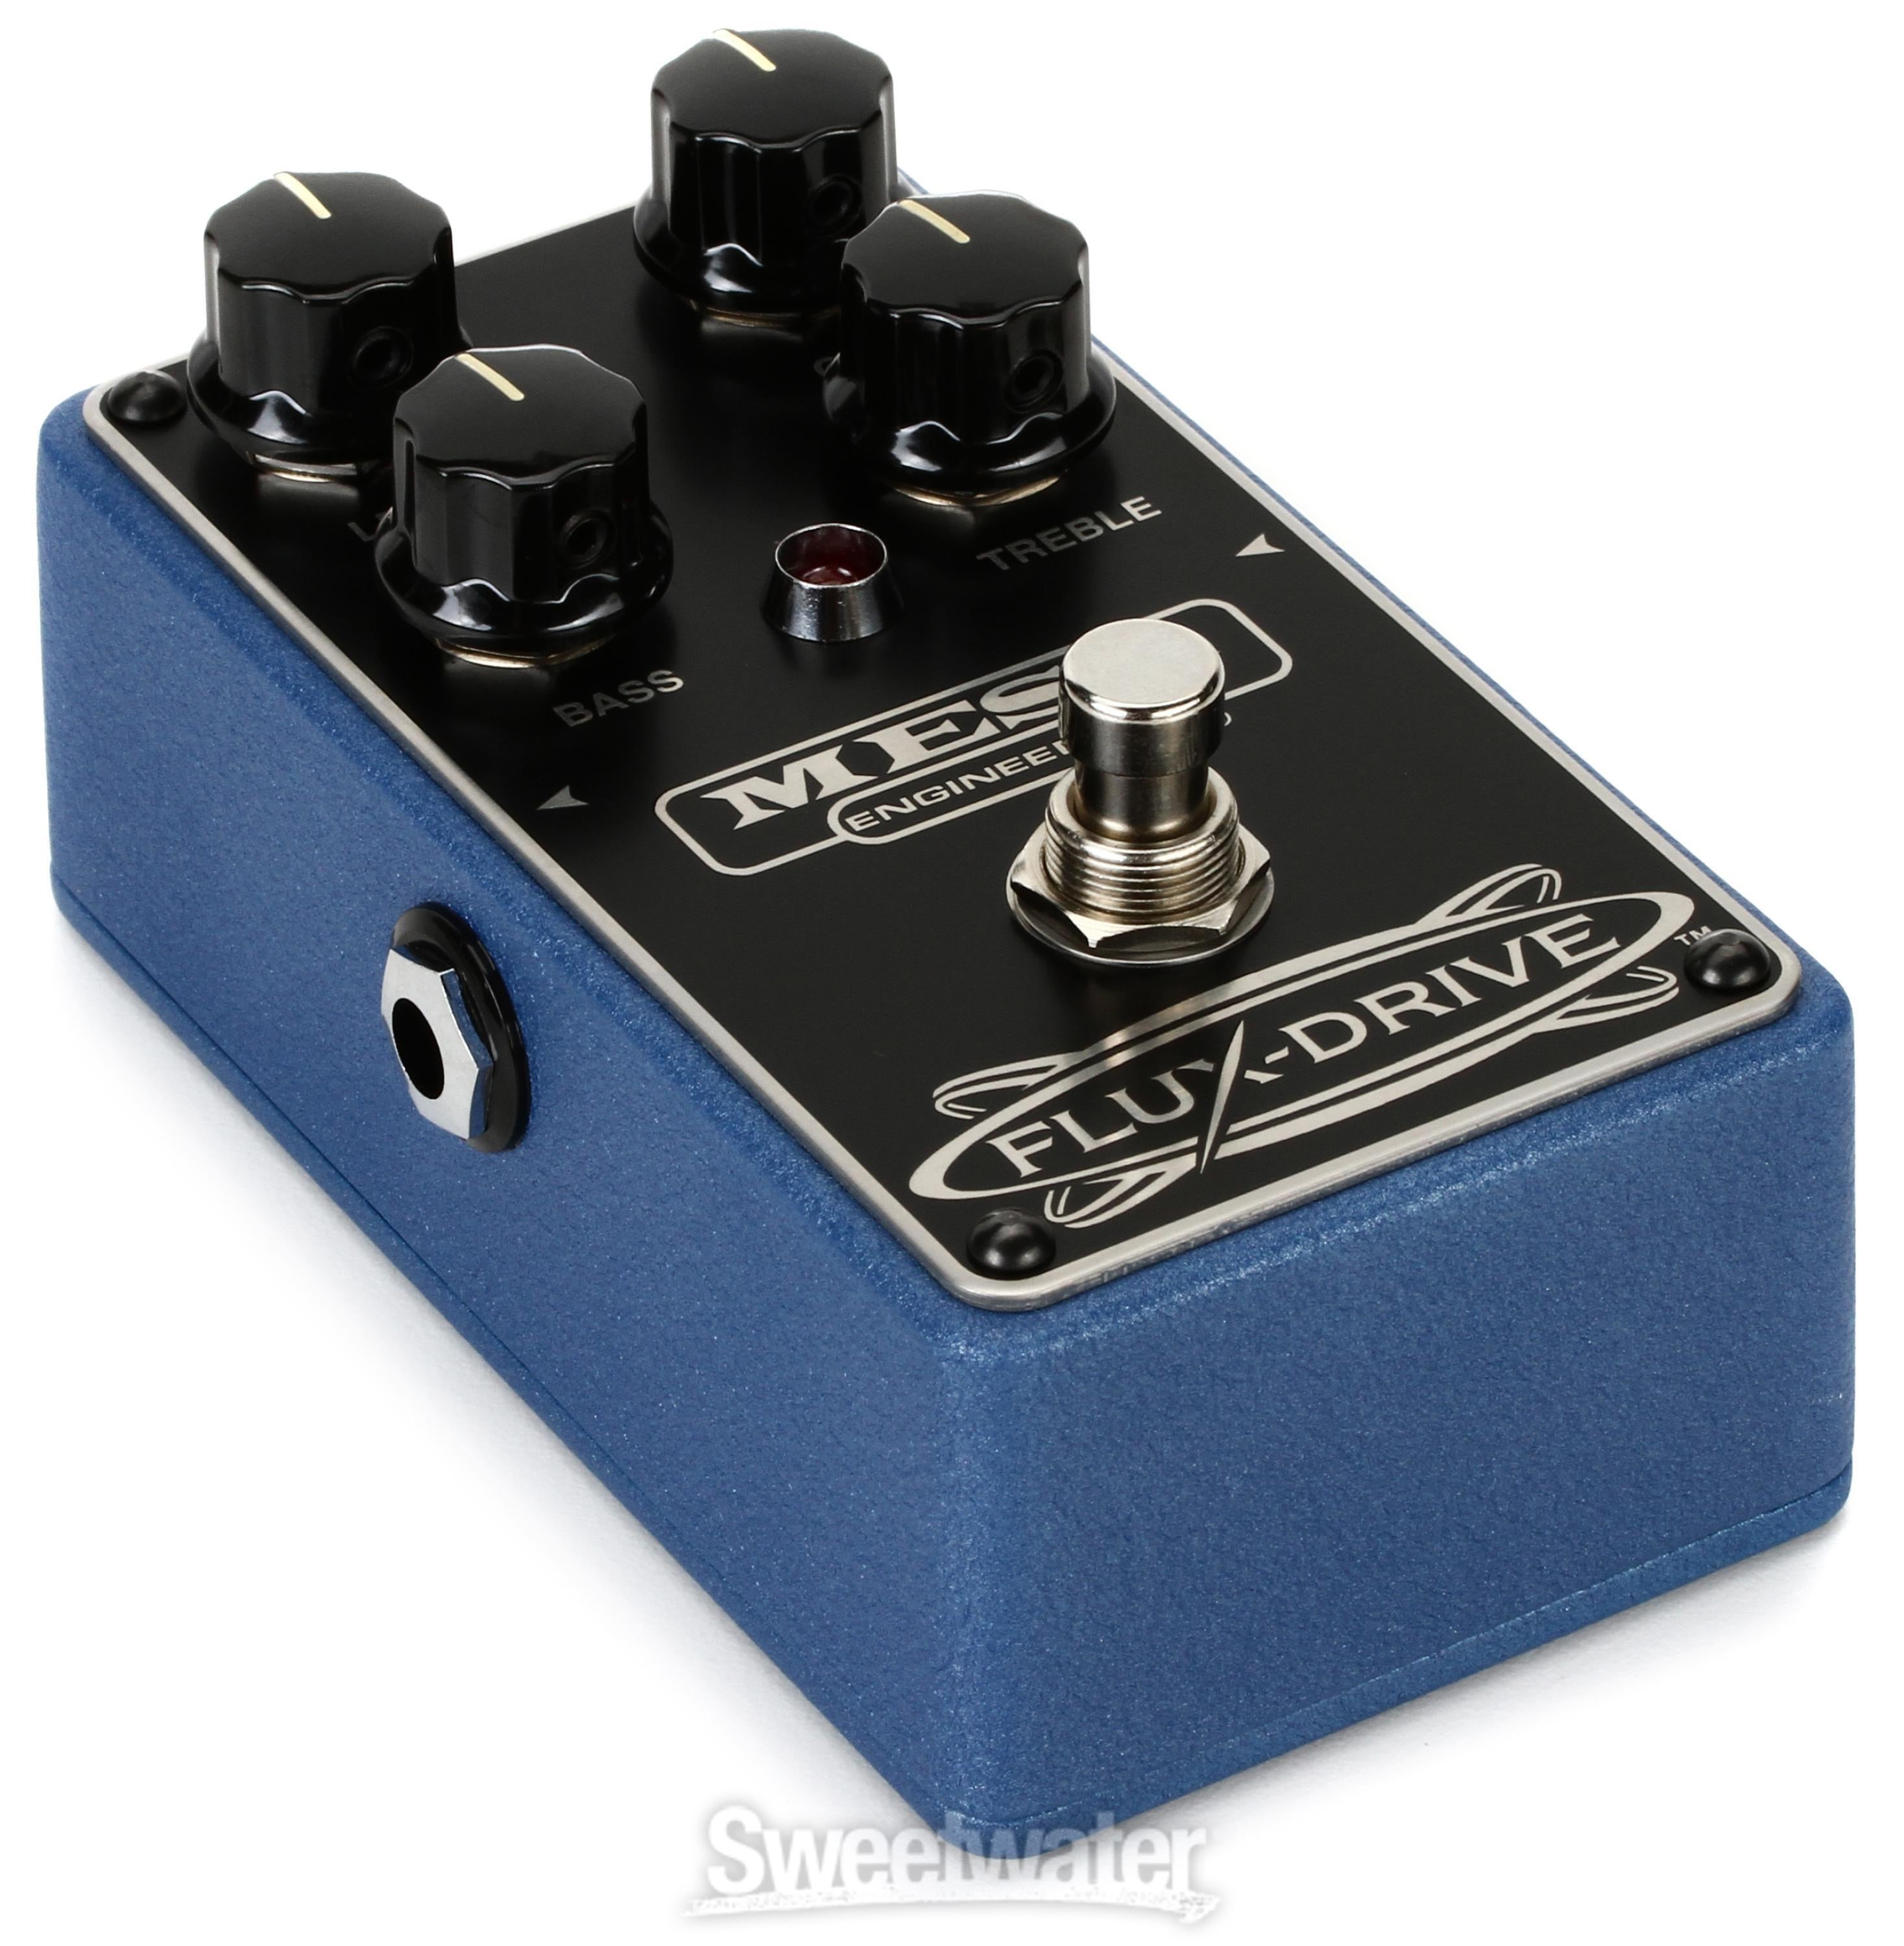 Mesa/Boogie Flux-Drive Overdrive Pedal